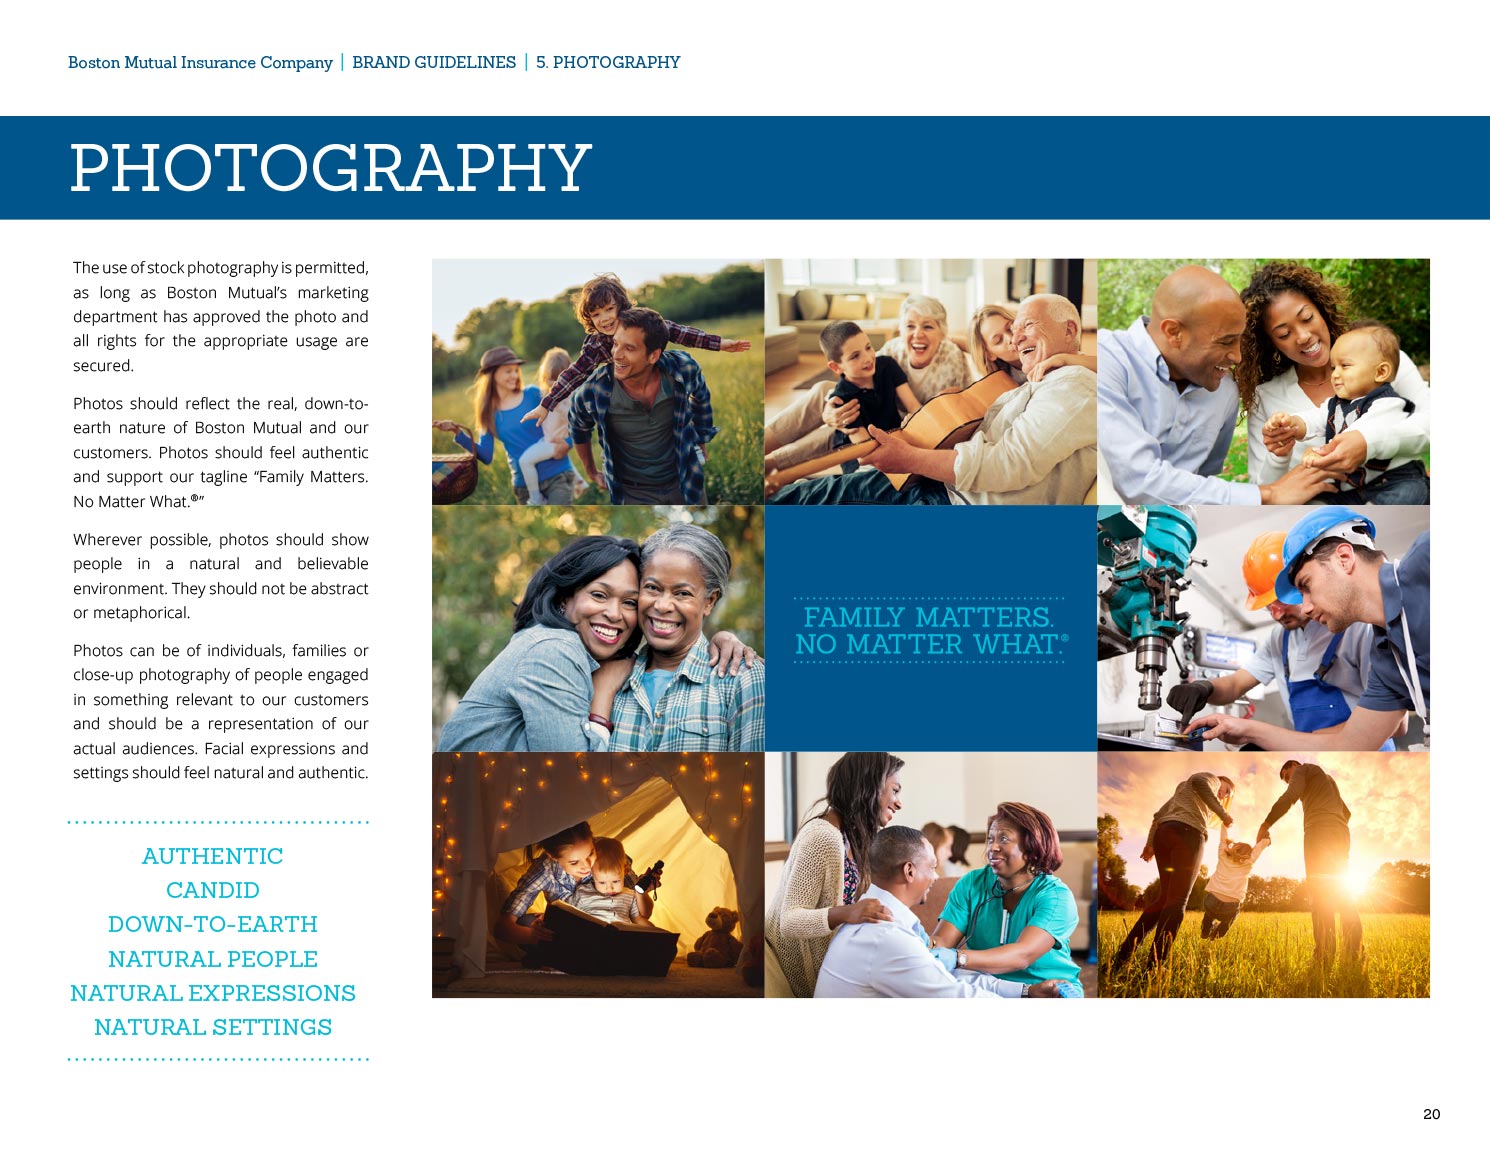 boston mutual brand guide page showing photography